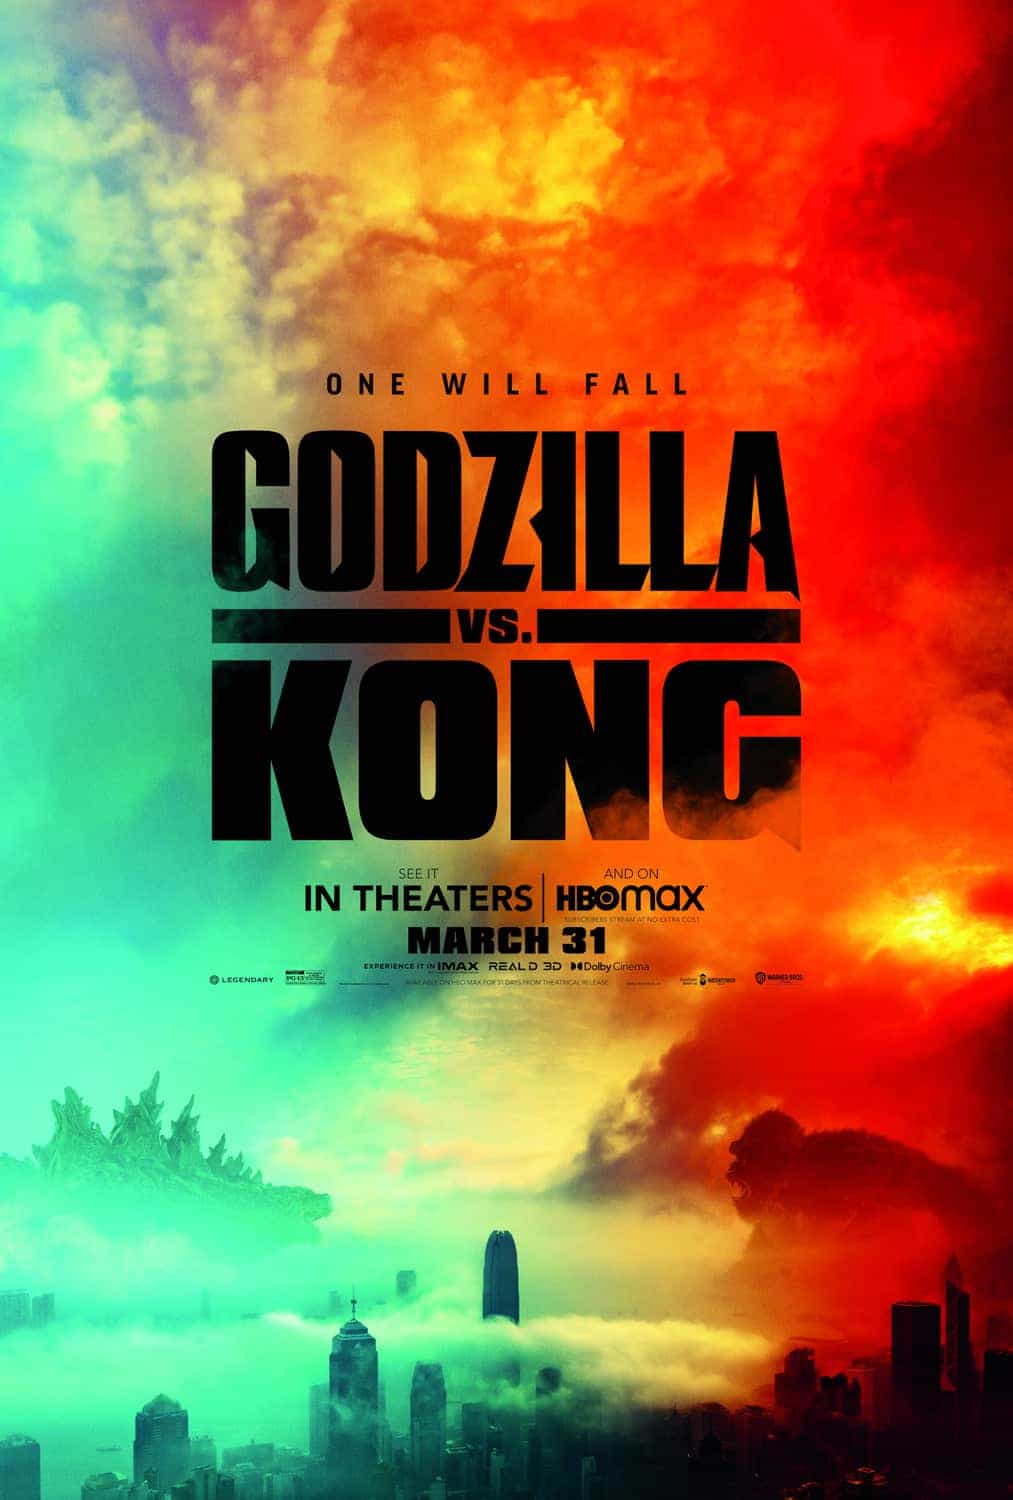 US Box Office Weekend Report 9th - 11th April 2021:  Godzilla and Kong have another high grossing weekend and stay at the top for a second week